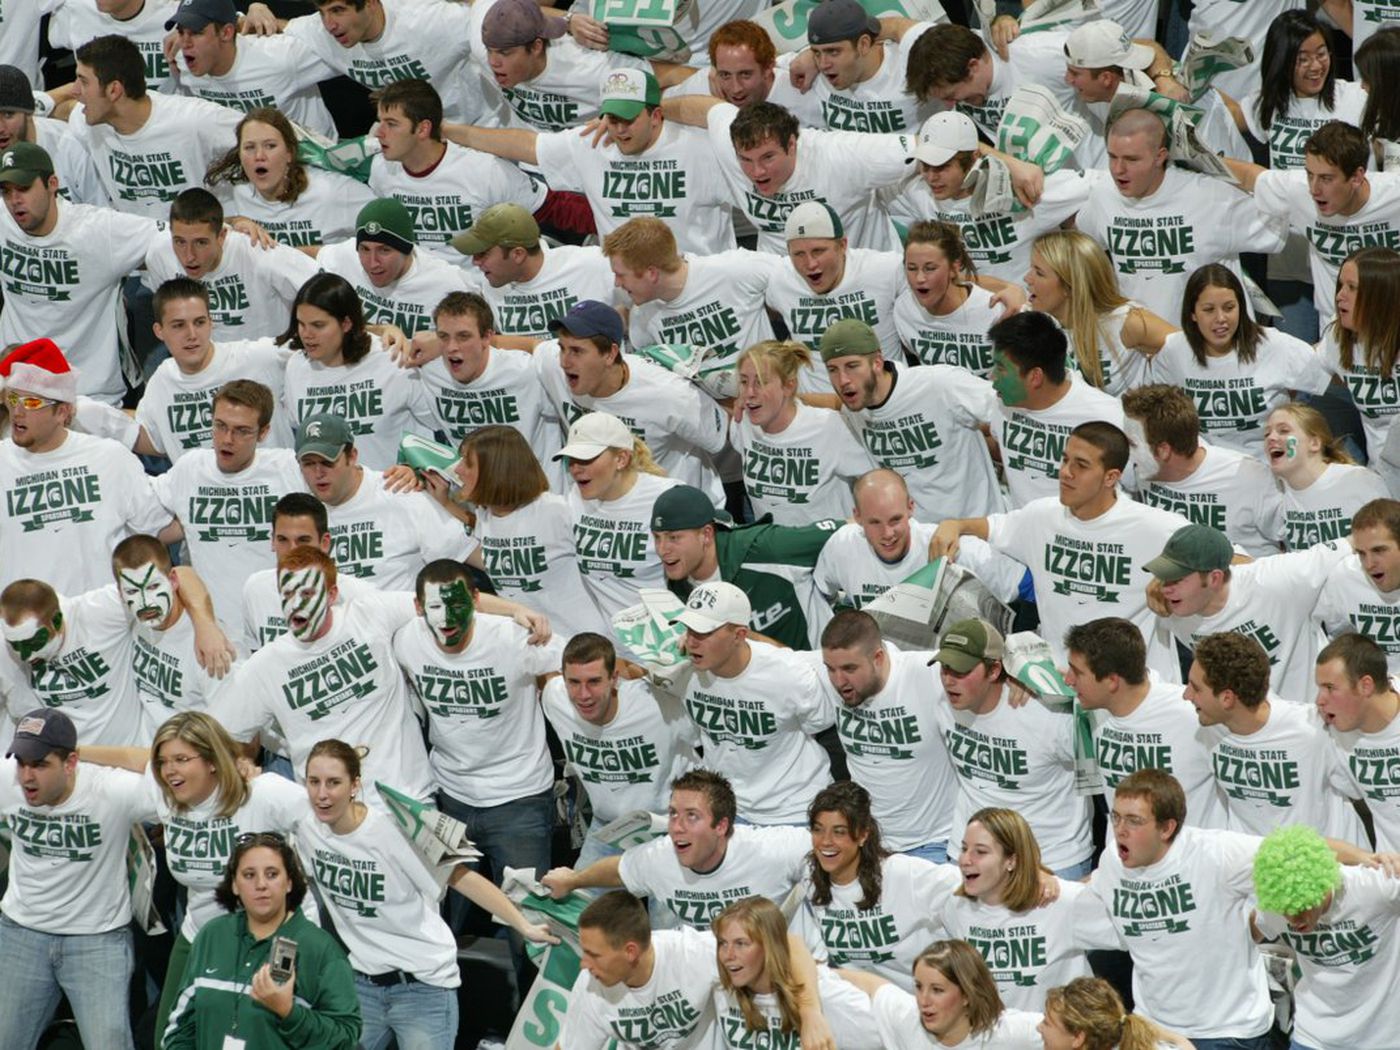 Izzone Plans To Show Support For Larry Nassar Victims The Only